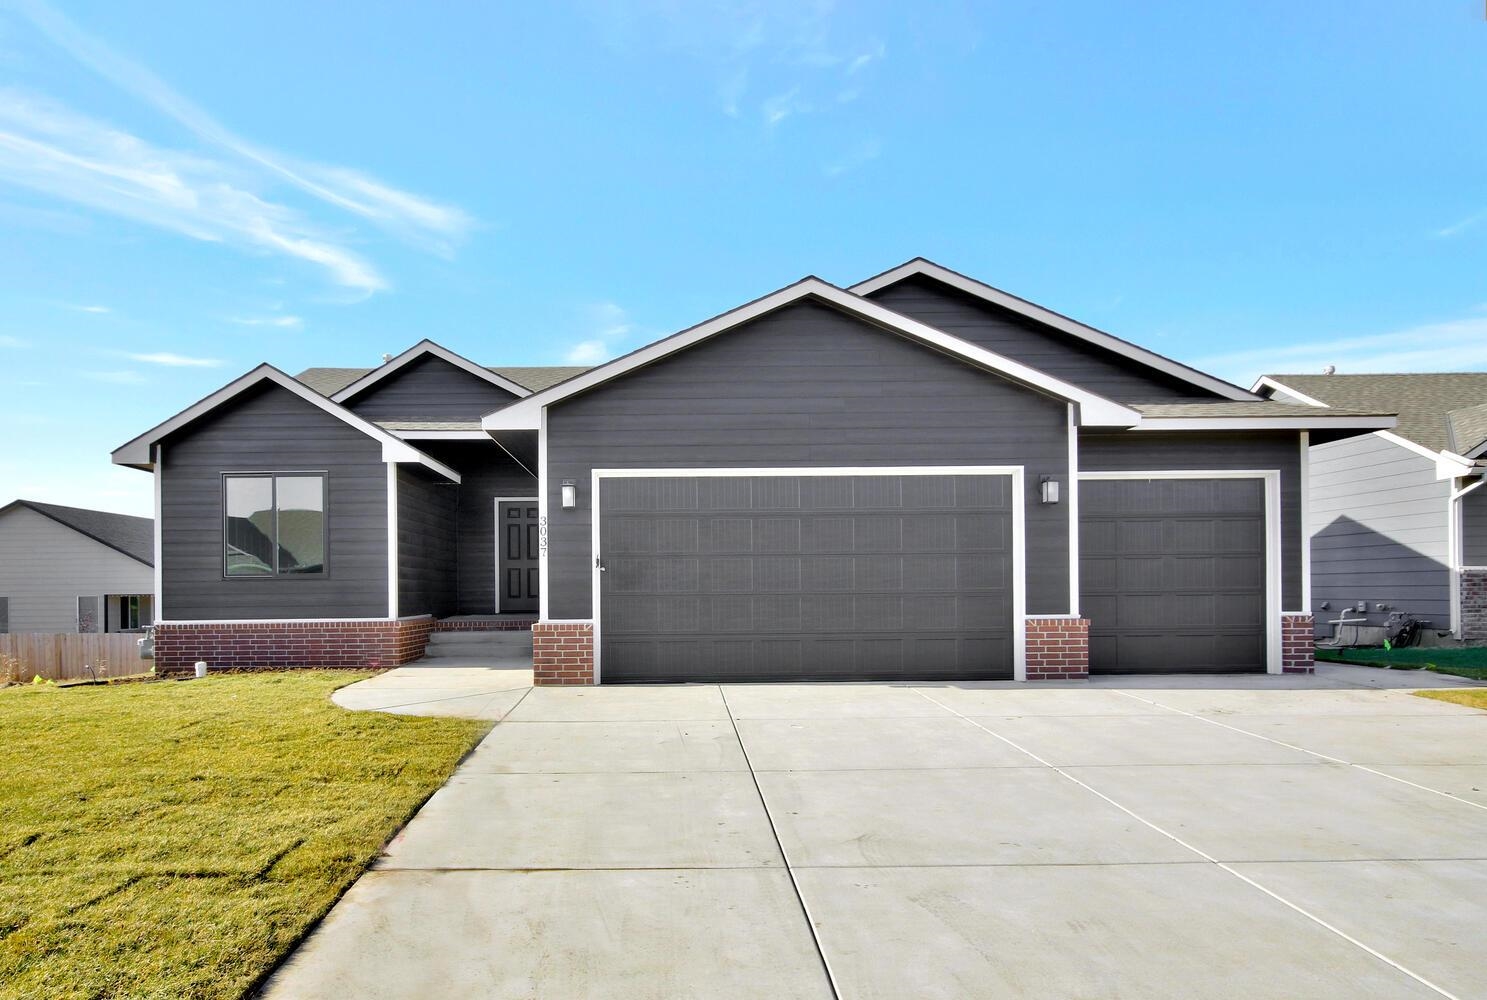 New construction residence with lots of nice amenities that include granite countertops, electric contemporary fireplace, spacious covered deck, patio, midlevel walkout, sprinkler system, irrigation well and sod included in price.